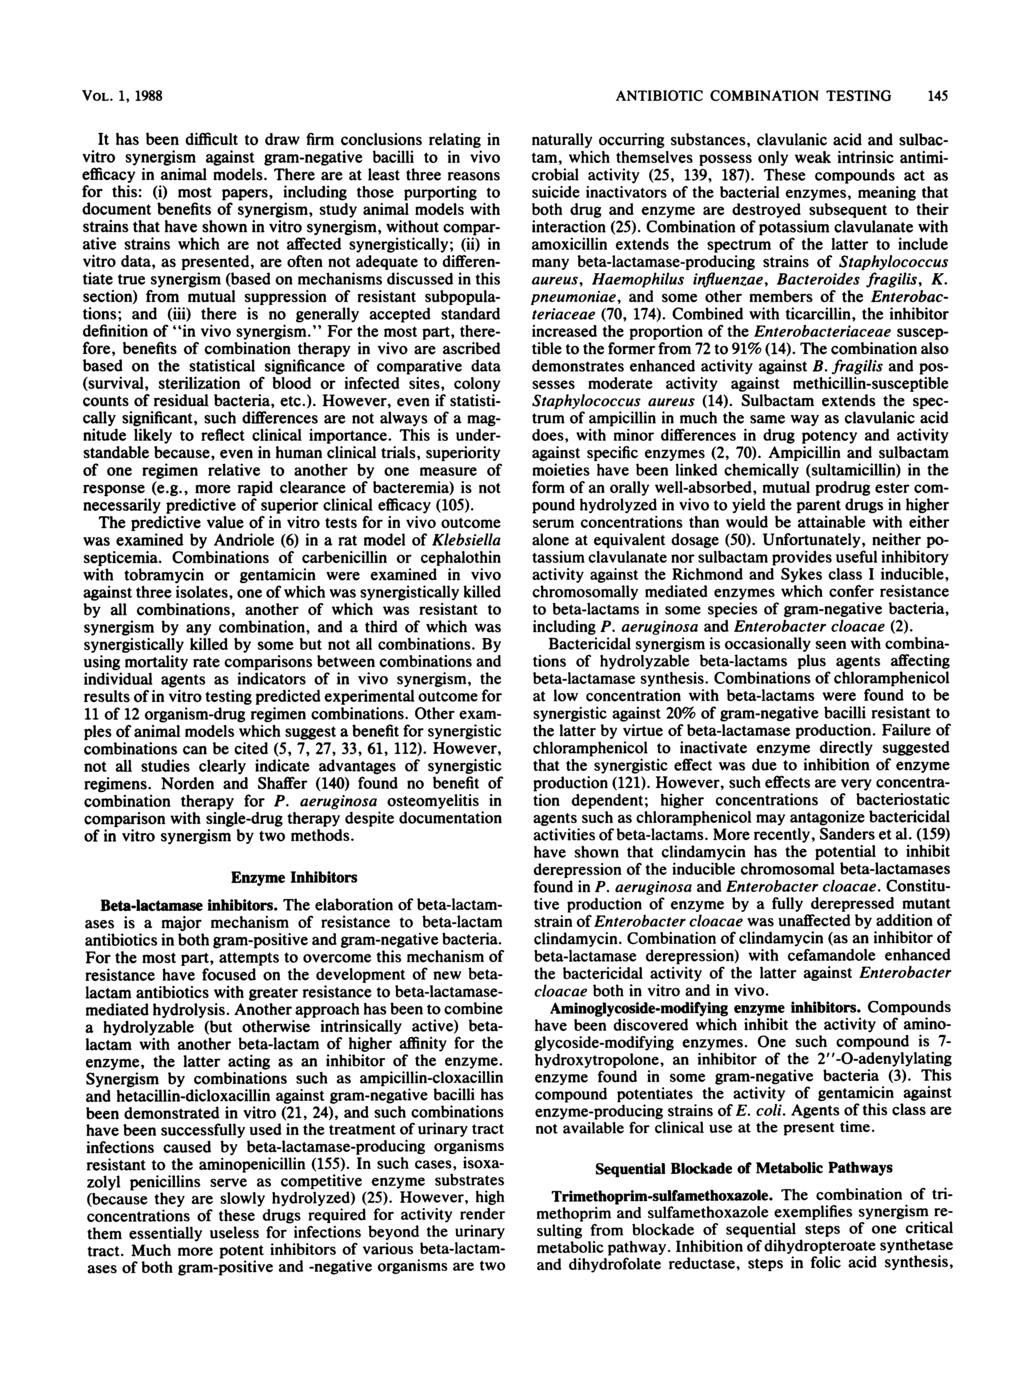 VOL. 1, 1988 It has been difficult to draw firm conclusions relating in vitro synergism against gram-negative bacilli to in vivo efficacy in animal models.